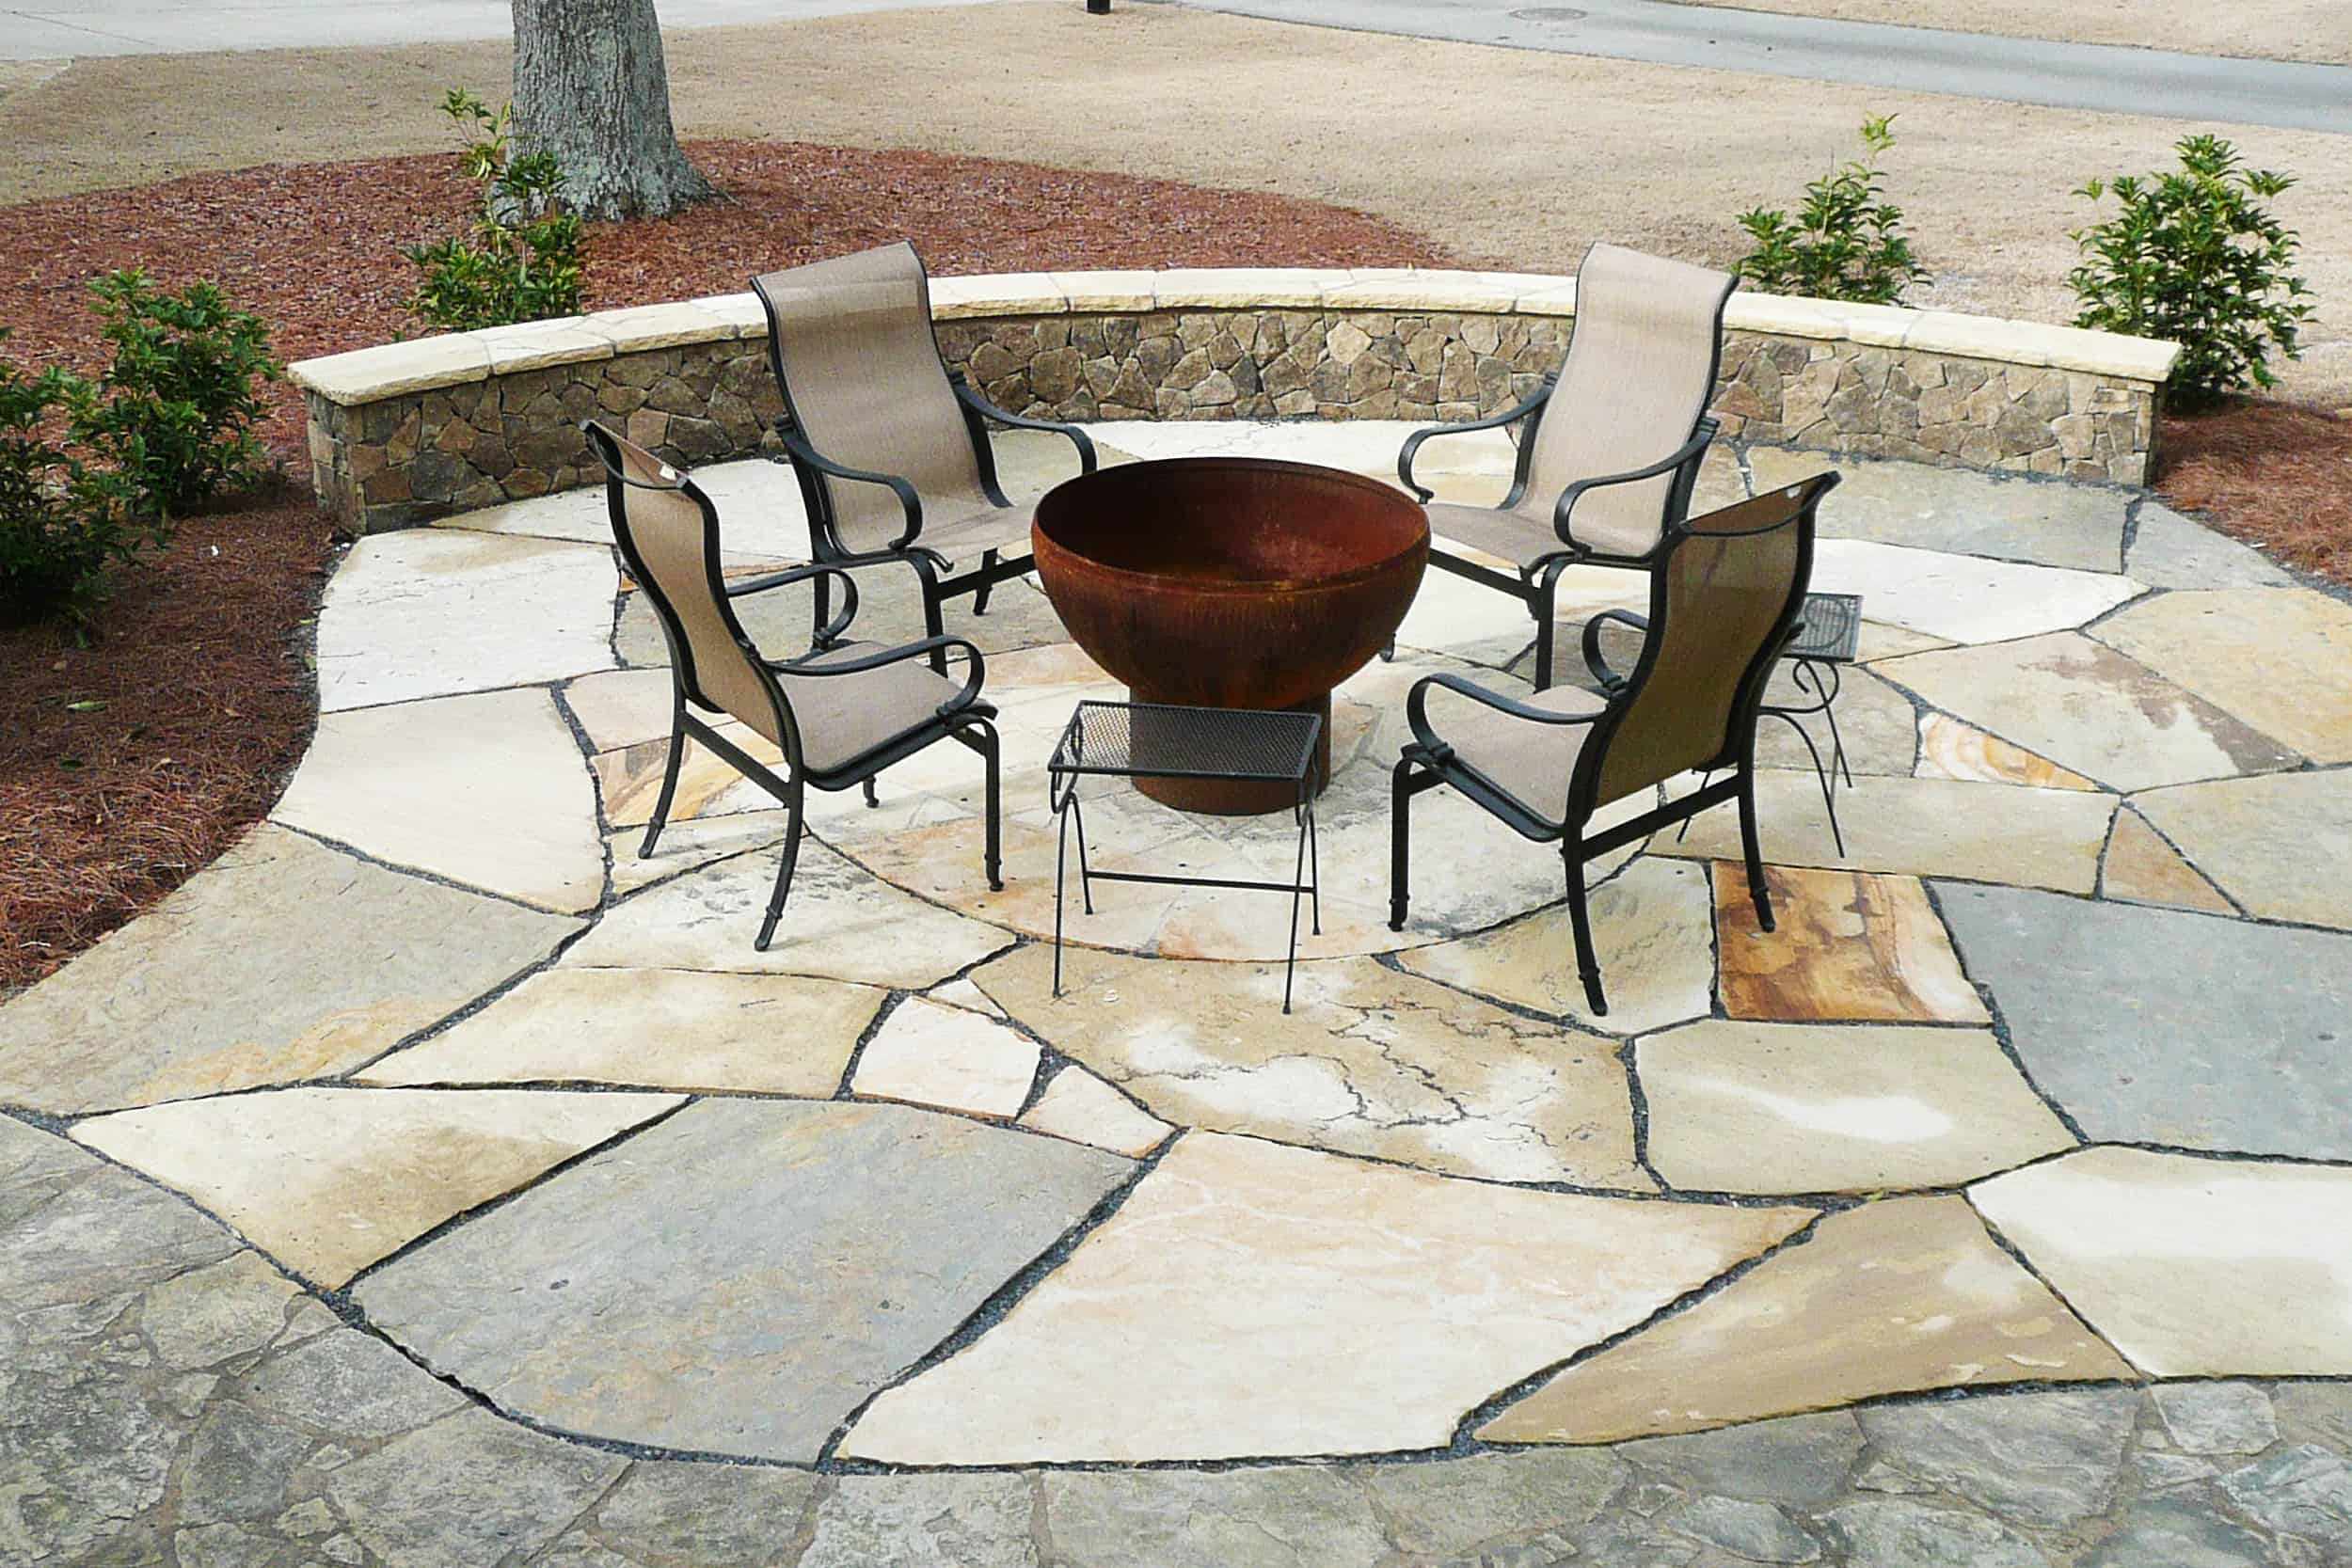 Braselton stone patio in Chateau Elan overlooking golfcourse